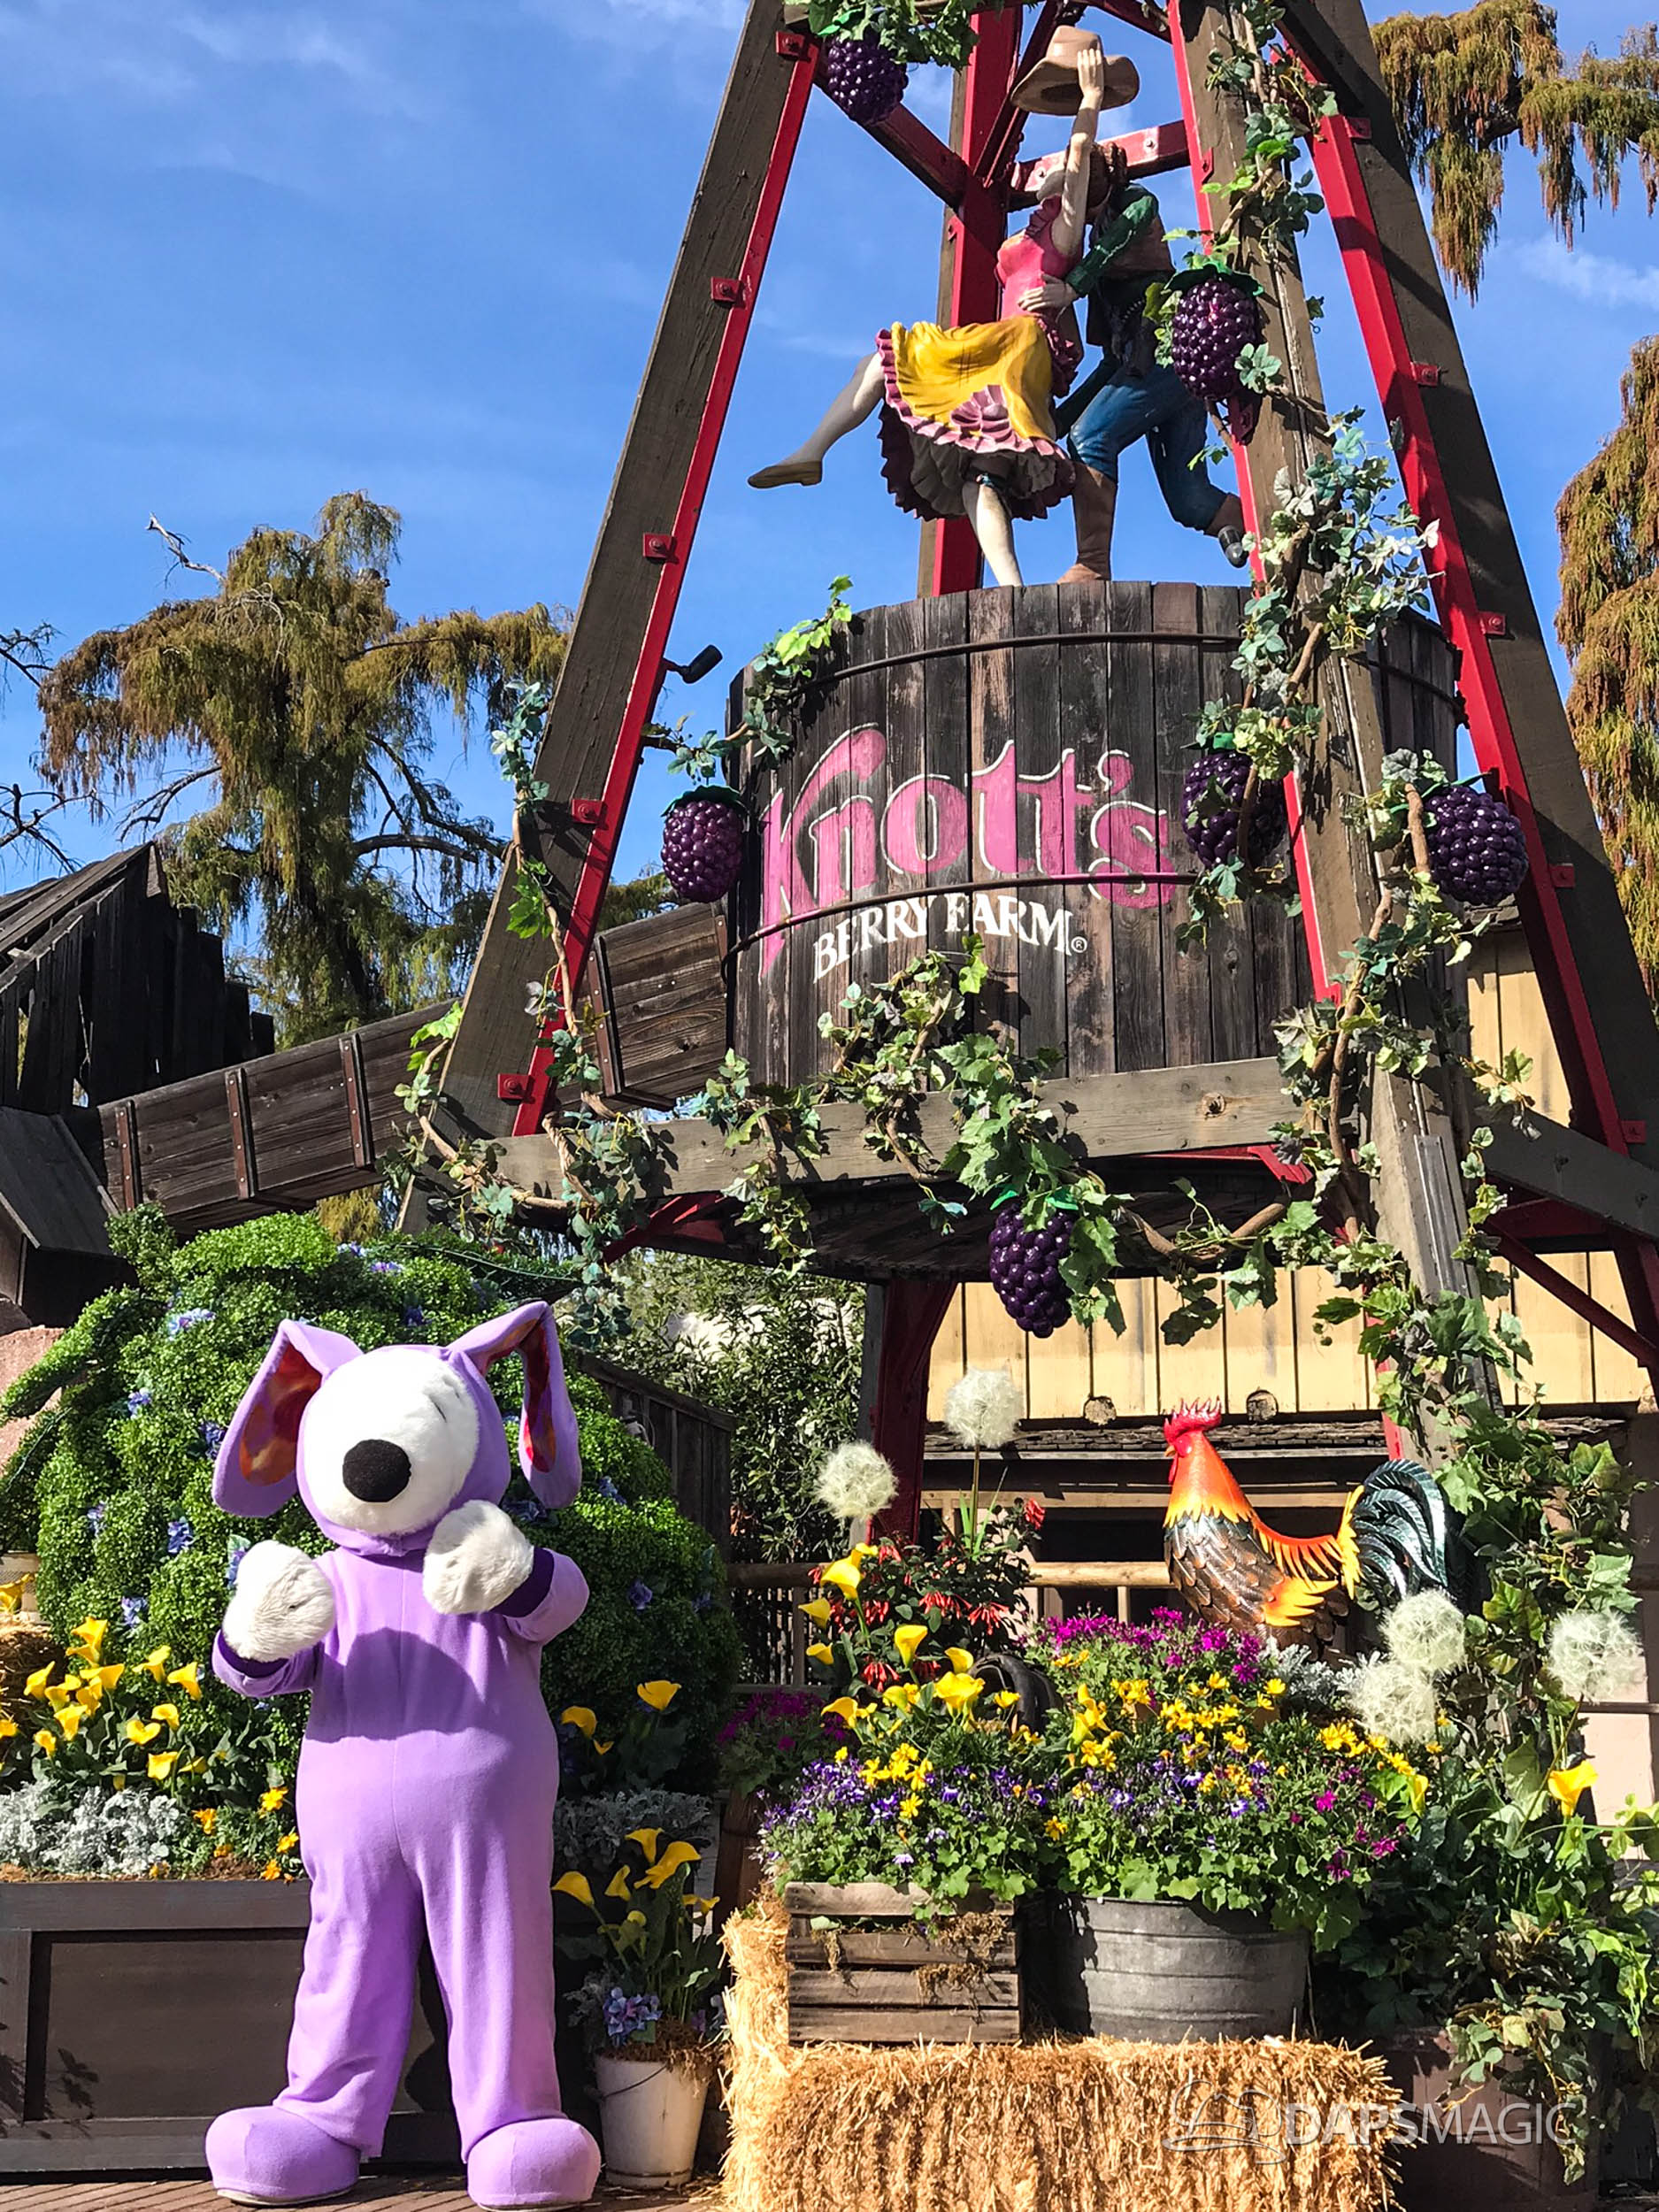 The Boysenberry Festival at Knott’s Berry Farm is Bigger than Ever in 2019!